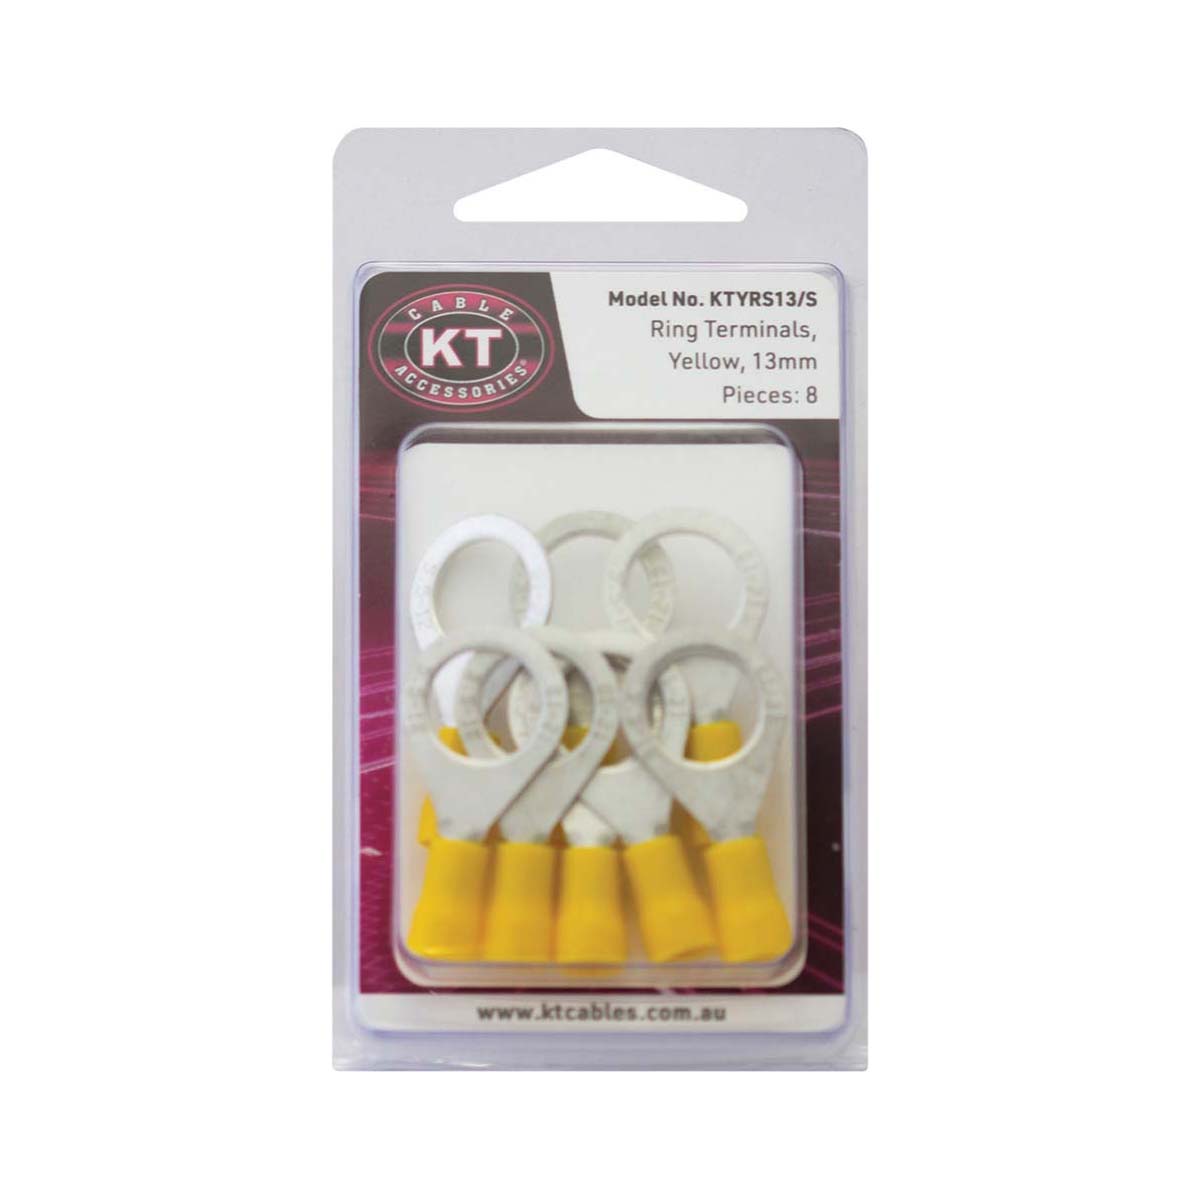 KT Cables Insulated Ring Terminal Yellow 6.0 13mm